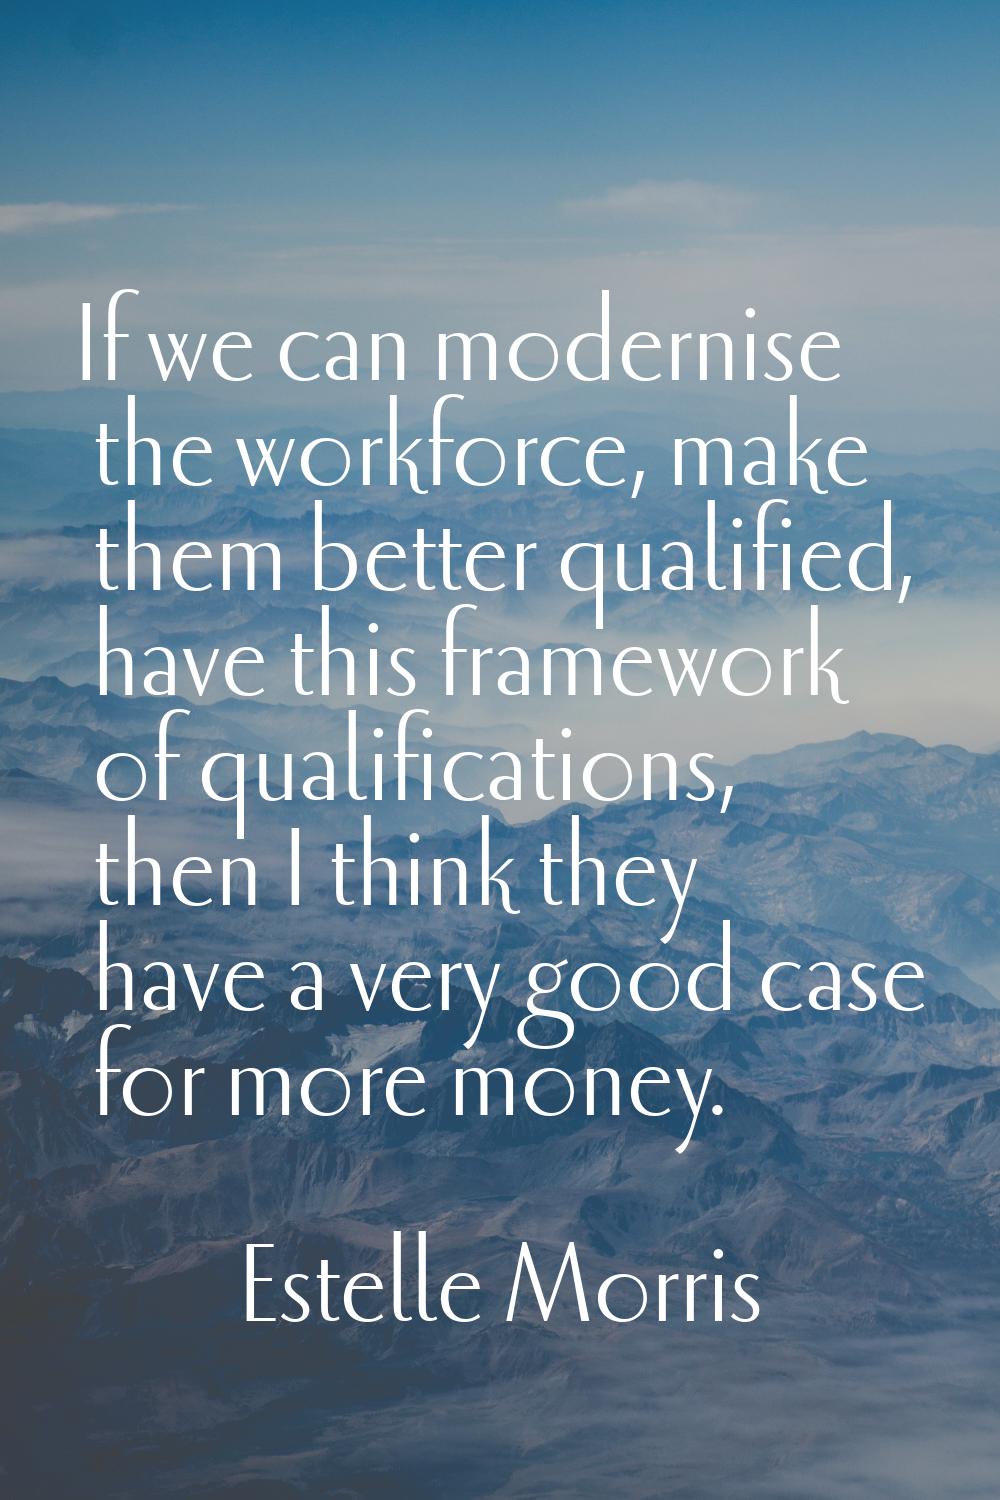 If we can modernise the workforce, make them better qualified, have this framework of qualification